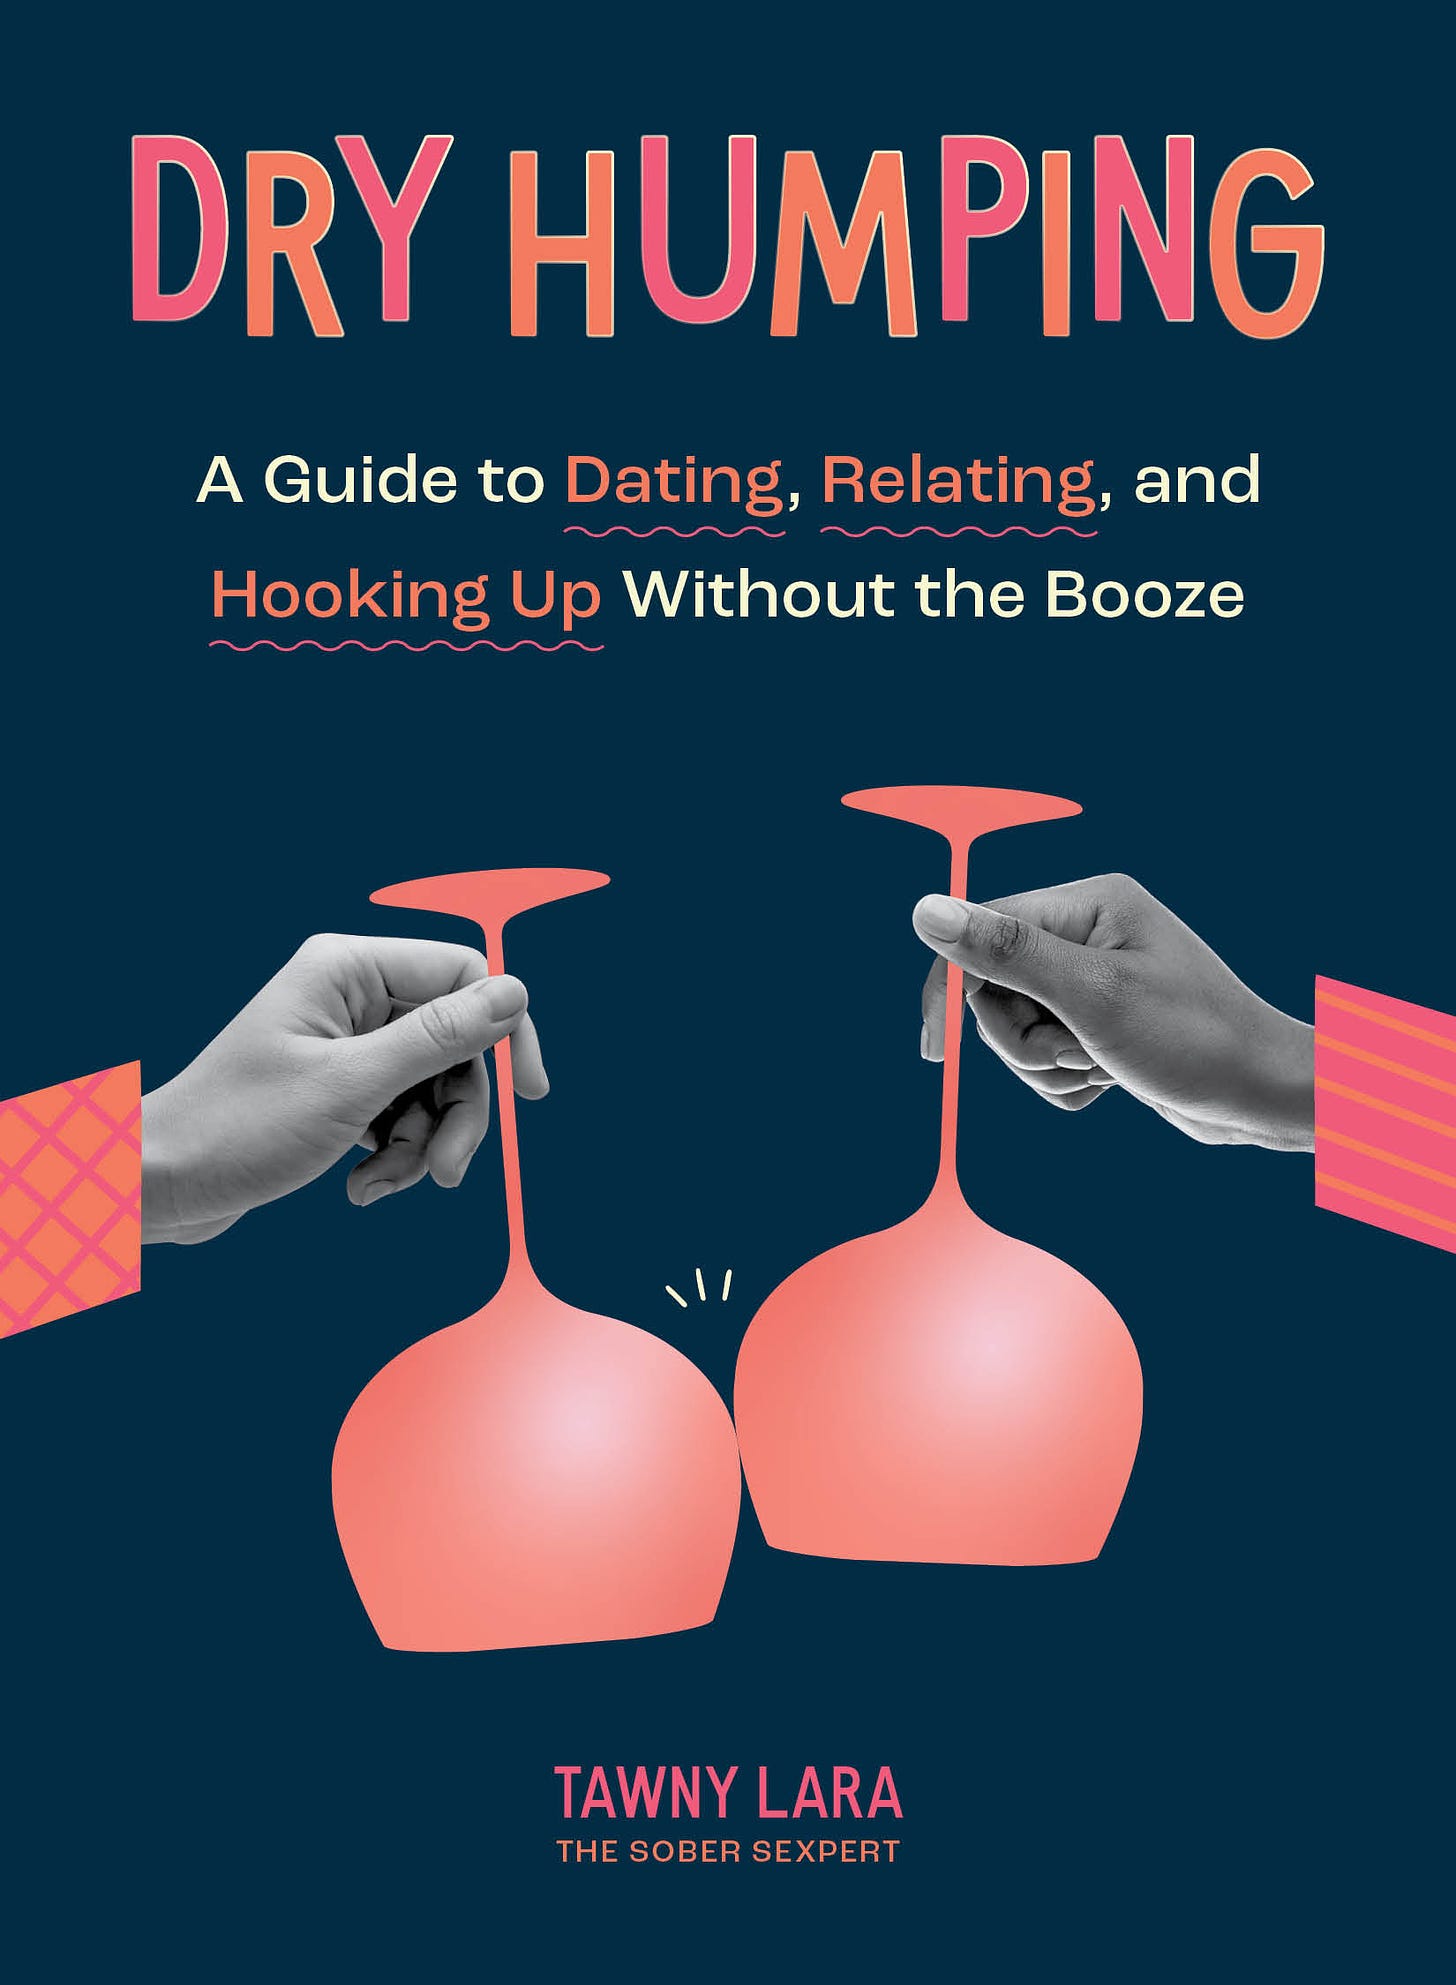    Dry Humping: A Guide to Dating, Relating, and Hooking Up Without the Booze book cover